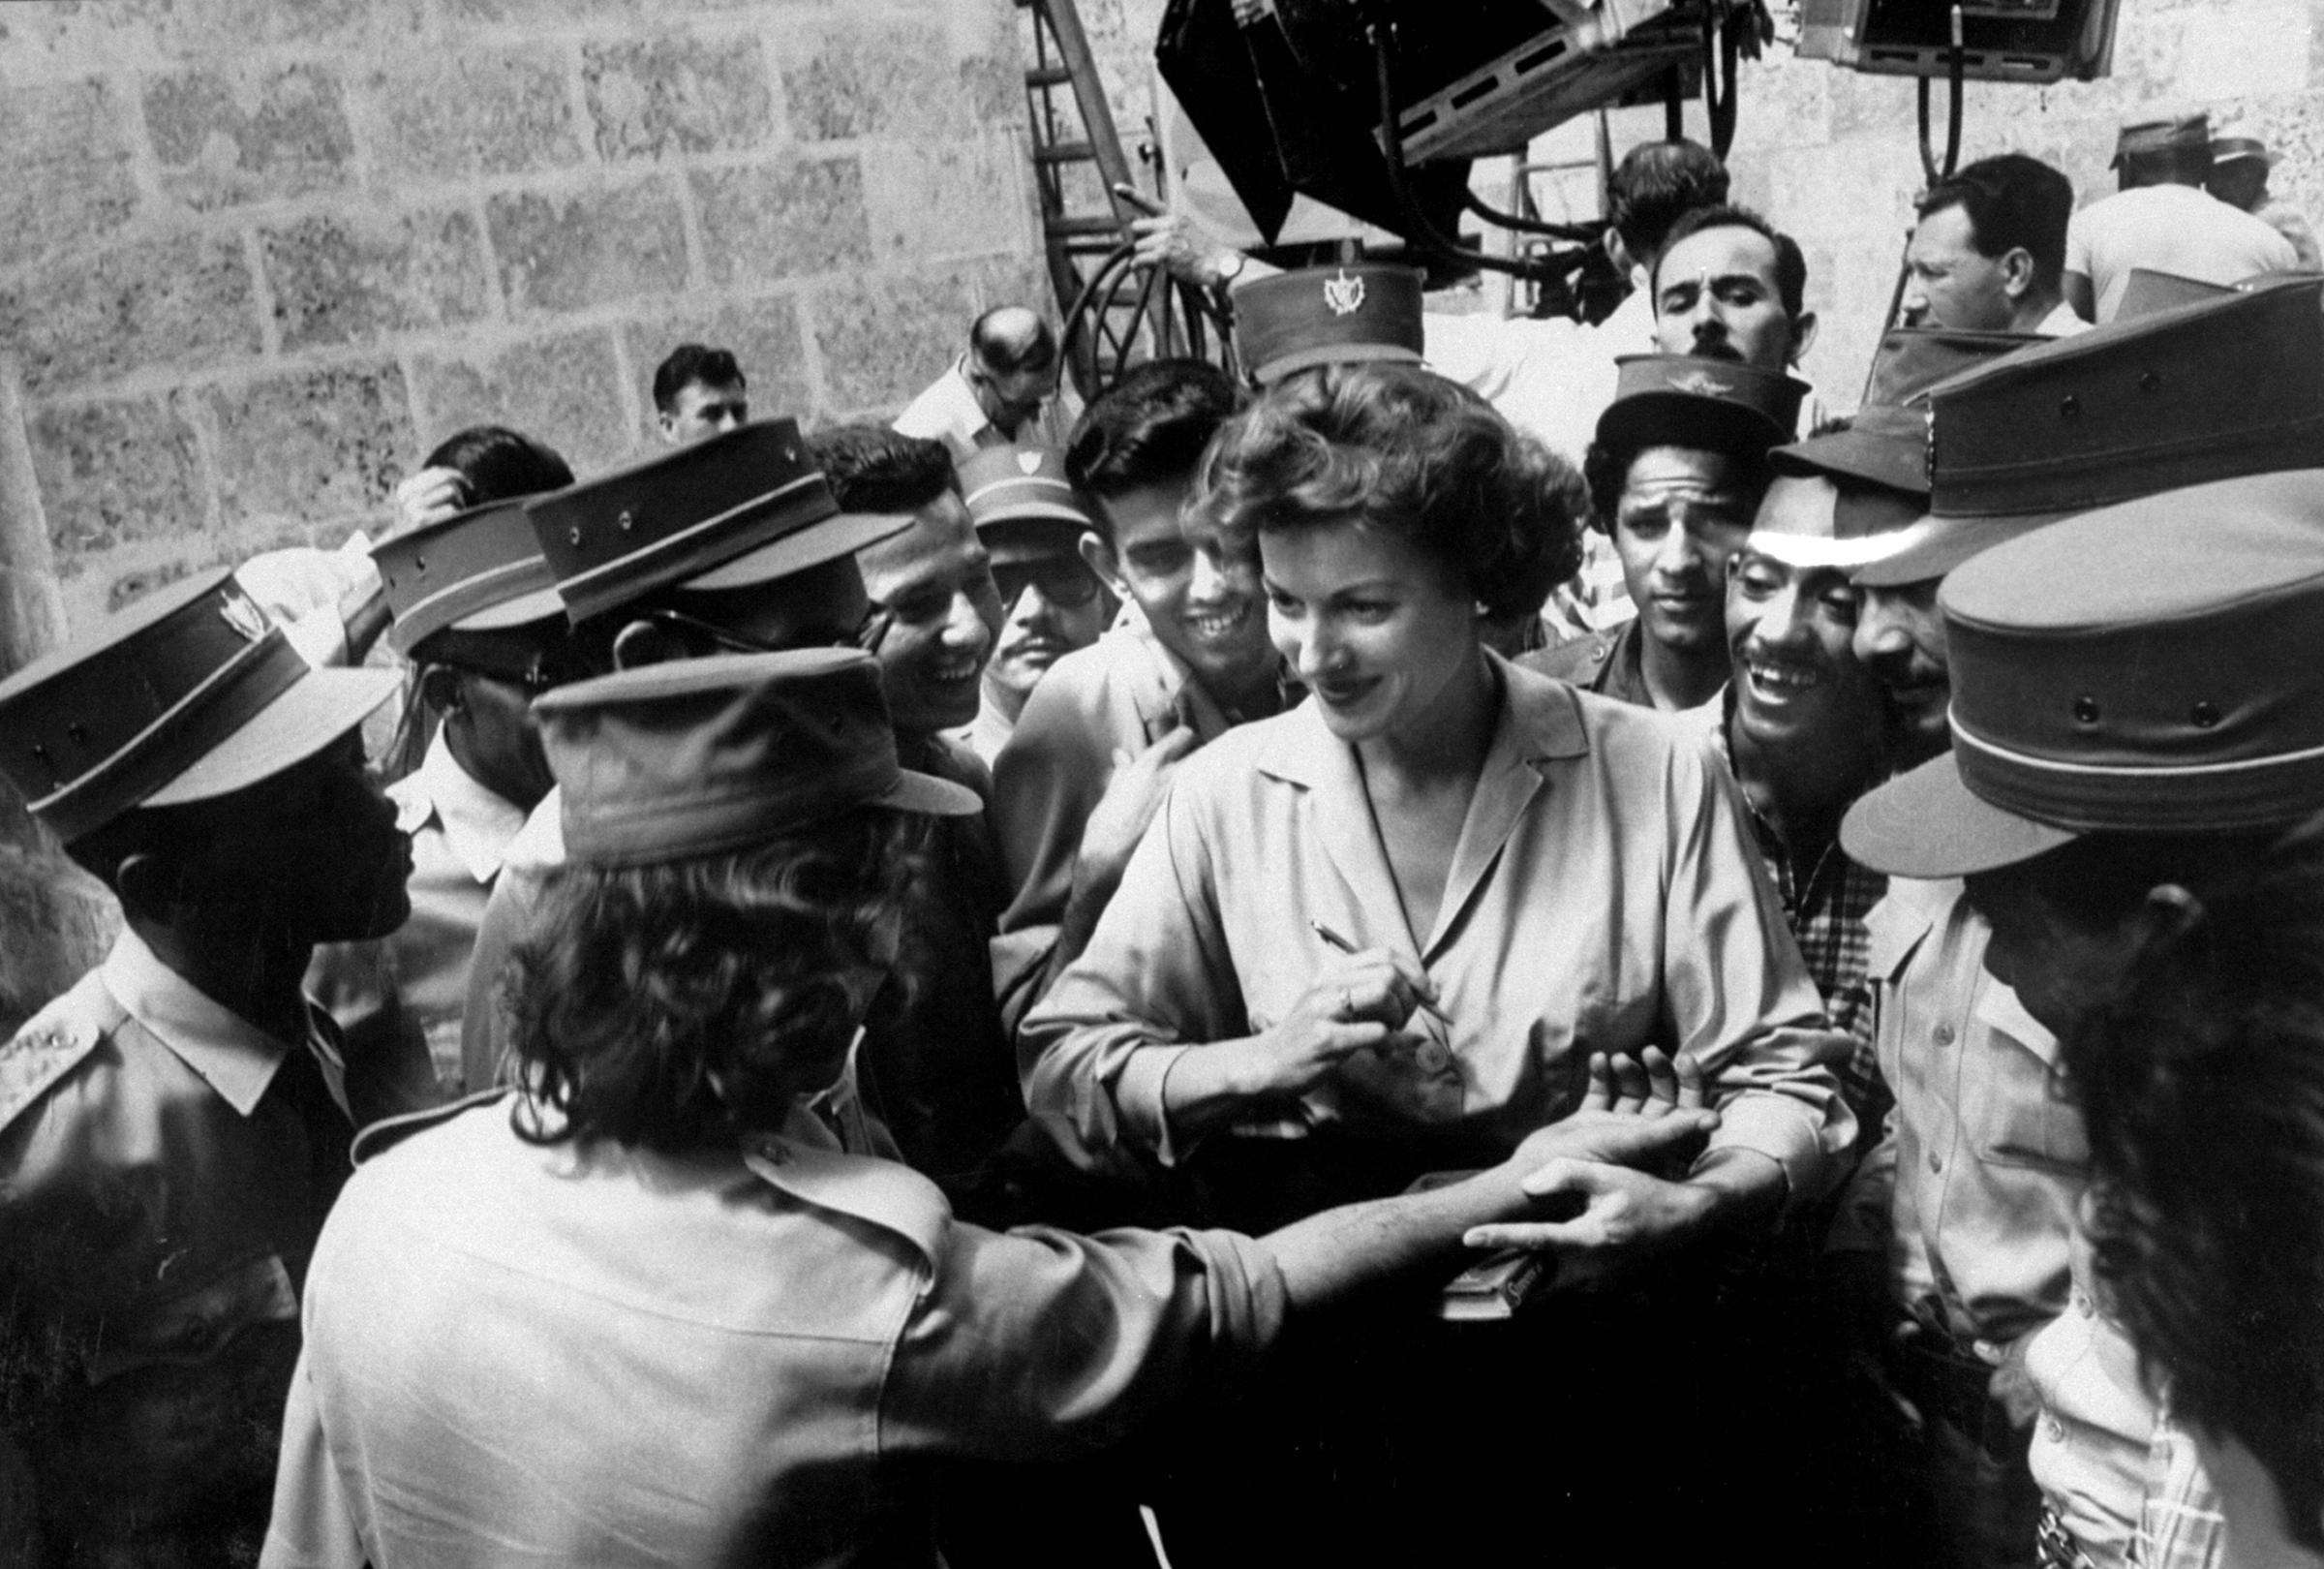 Maureen O'Hara signing autographs while filming "Our Man in Havana," 1959.